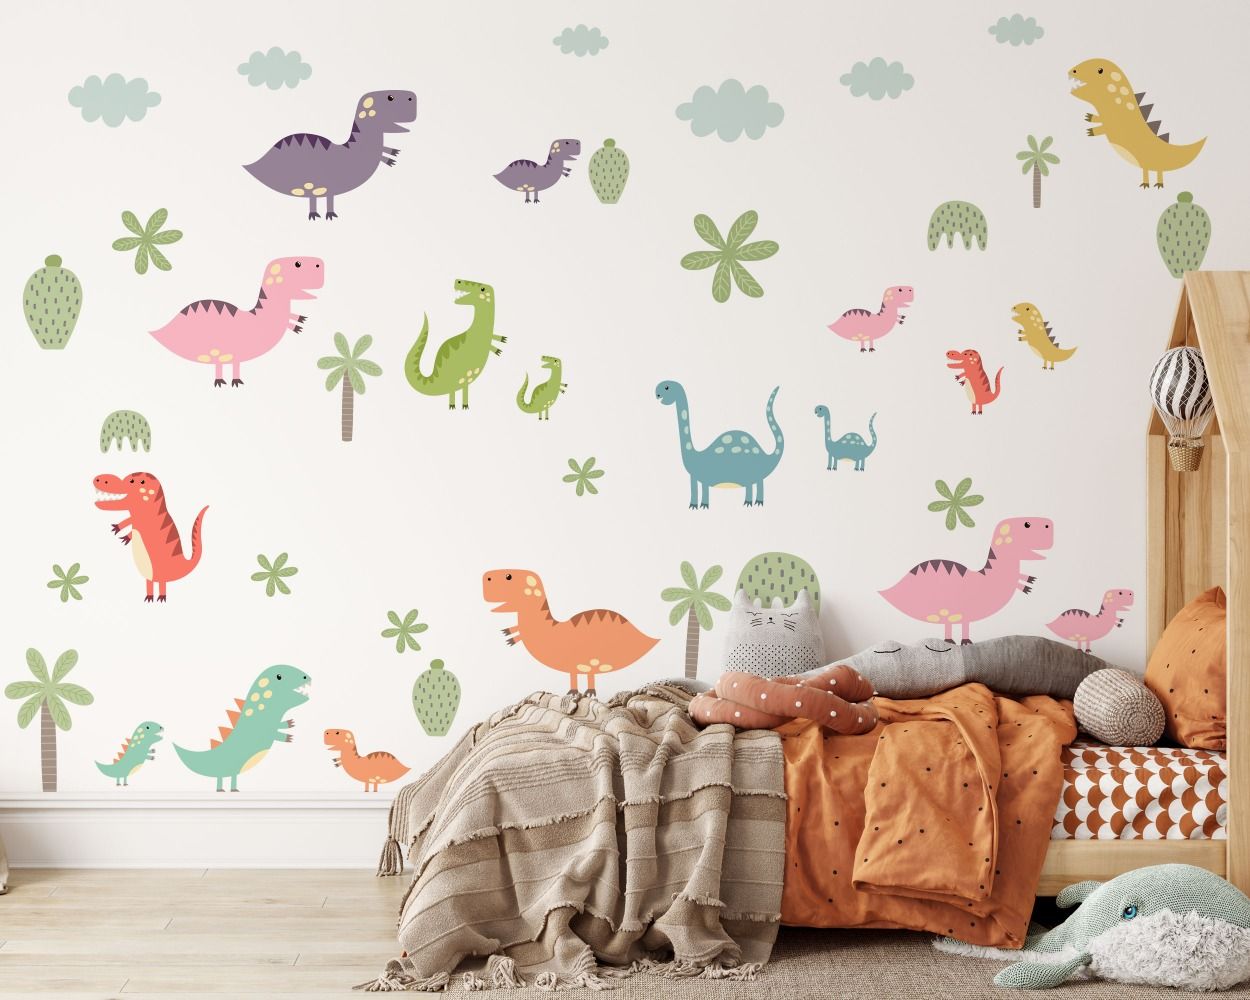 Dinosaurs, Jurassic park Theme Watercolor Wall Stickers for Nursery Wall Decor